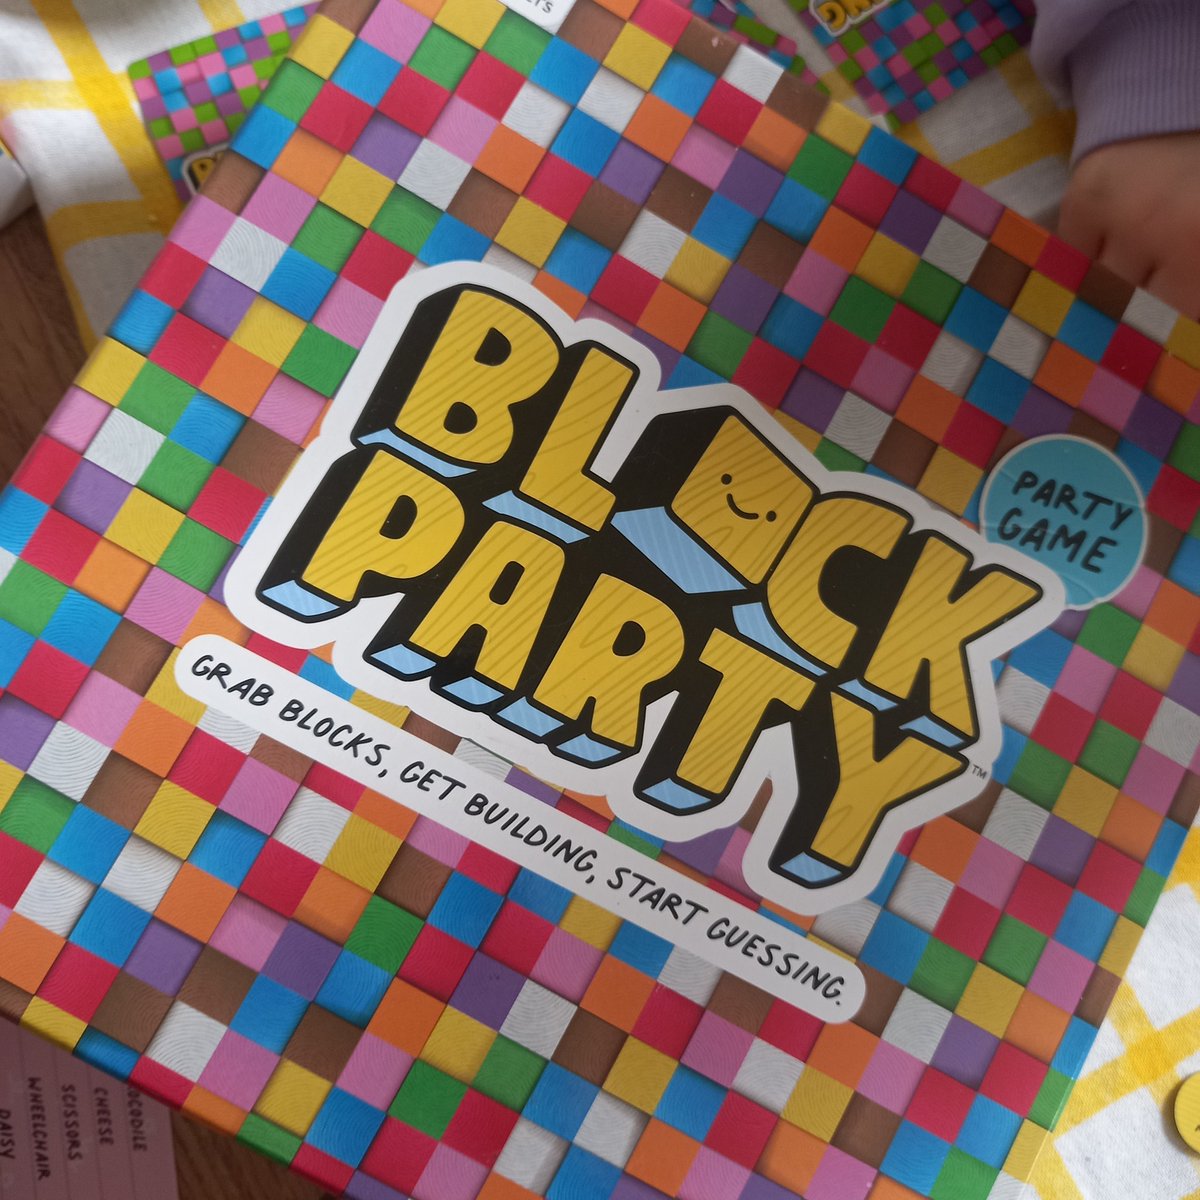 500 Games 1 Year Game #167 BLOCK PARTY by @bigpotatogames A family favourite and one my little daughter enjoys playing at every chance. The premise of the game is simple....use blocks to make your assigned image which the other players will try and guess. #boardgames